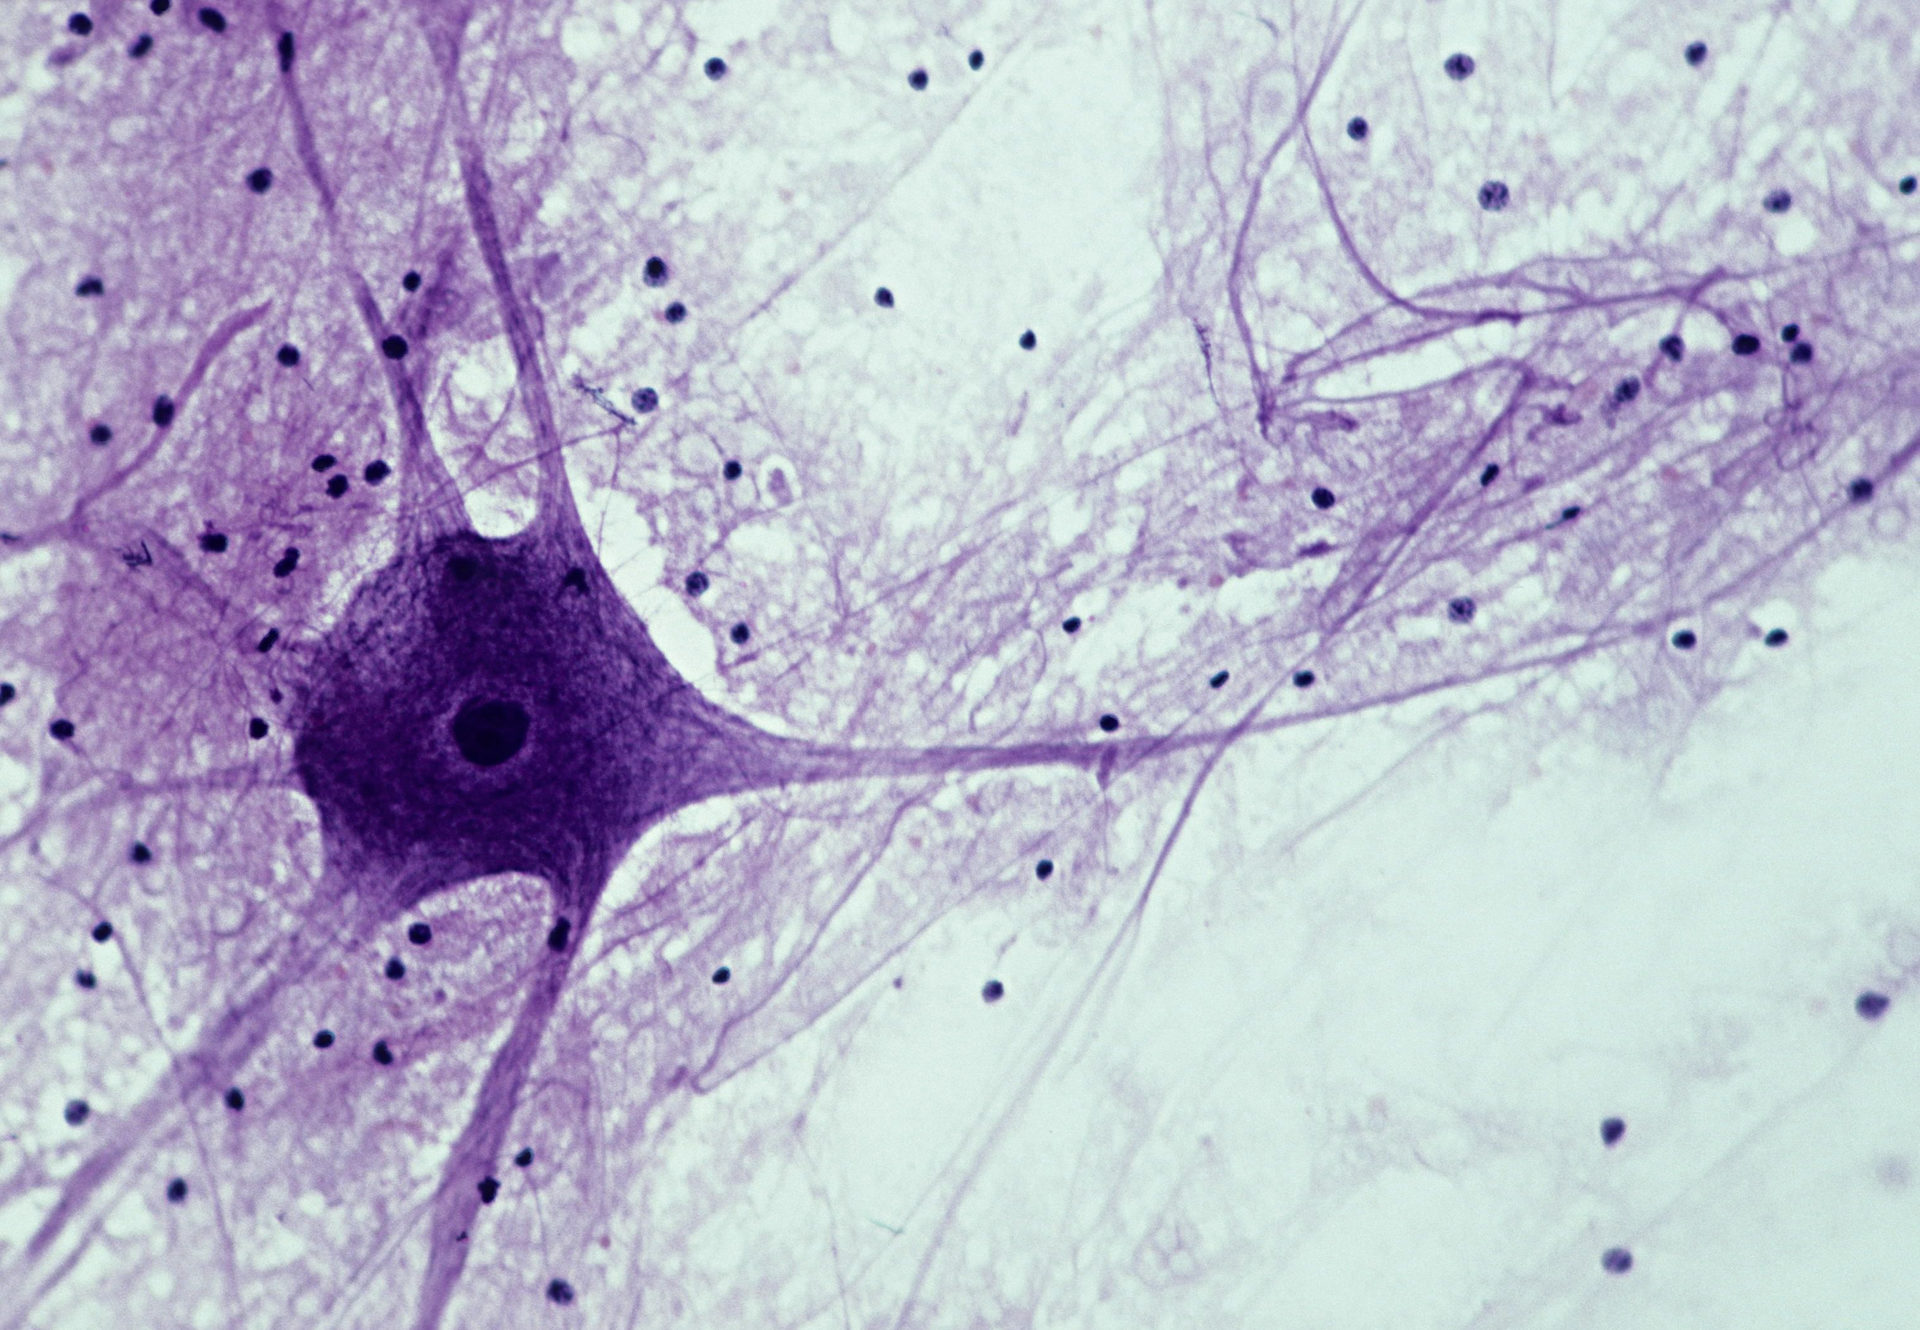 Motor neuron; Spinal Cord, 50X at 35mm. Shows: cell body, nucleus, dendrites (numerous processes attached to cell body), axon (single, long, nerve fiber), and neuroglial cells (dark spots).